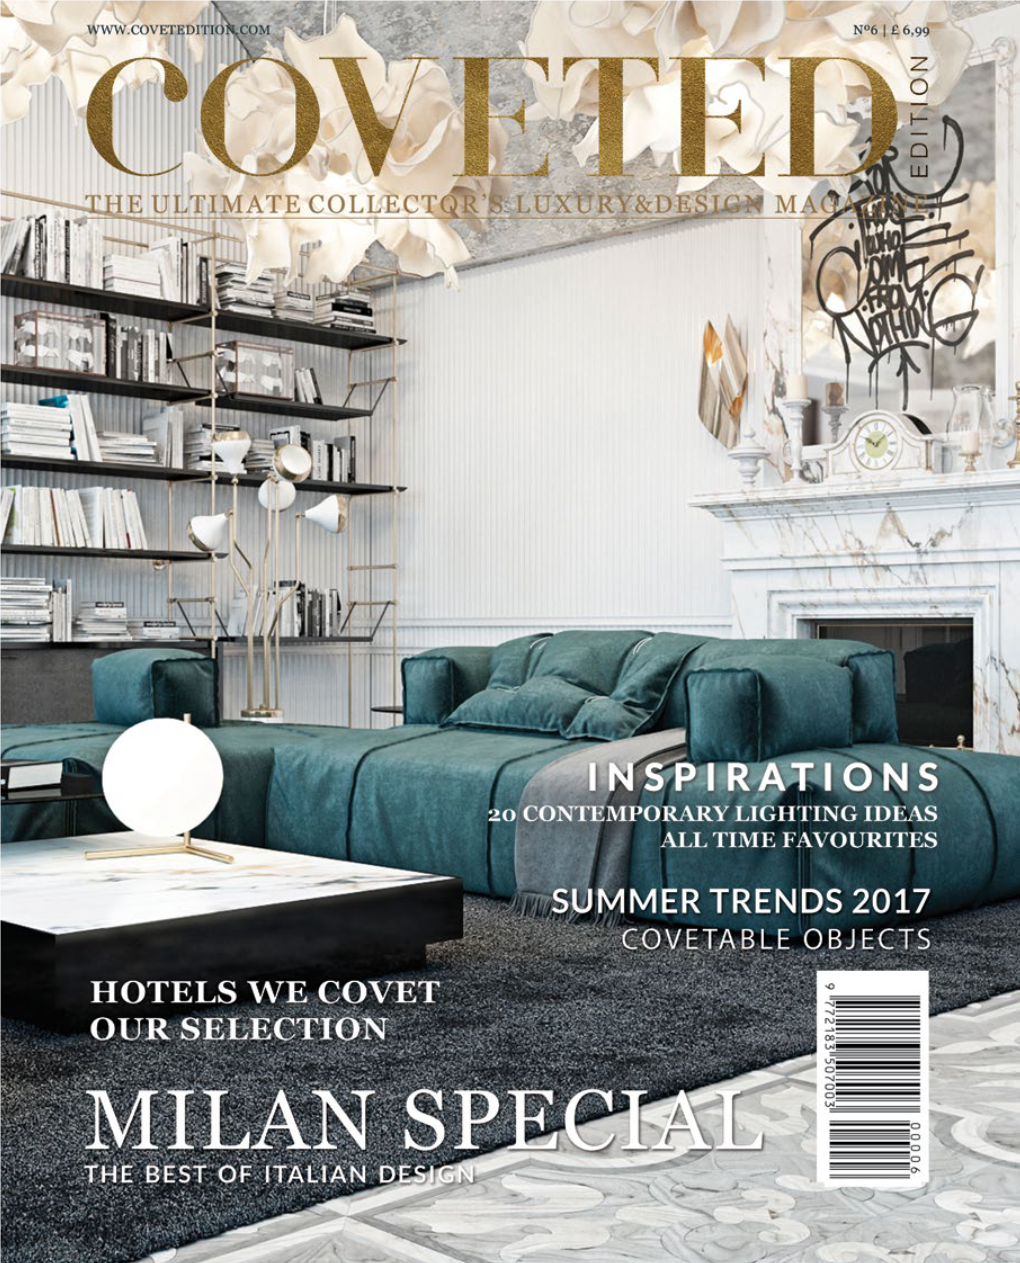 Coveted Magazine Page 1. Discover the Recipients of the Inaugural Coveted Awards